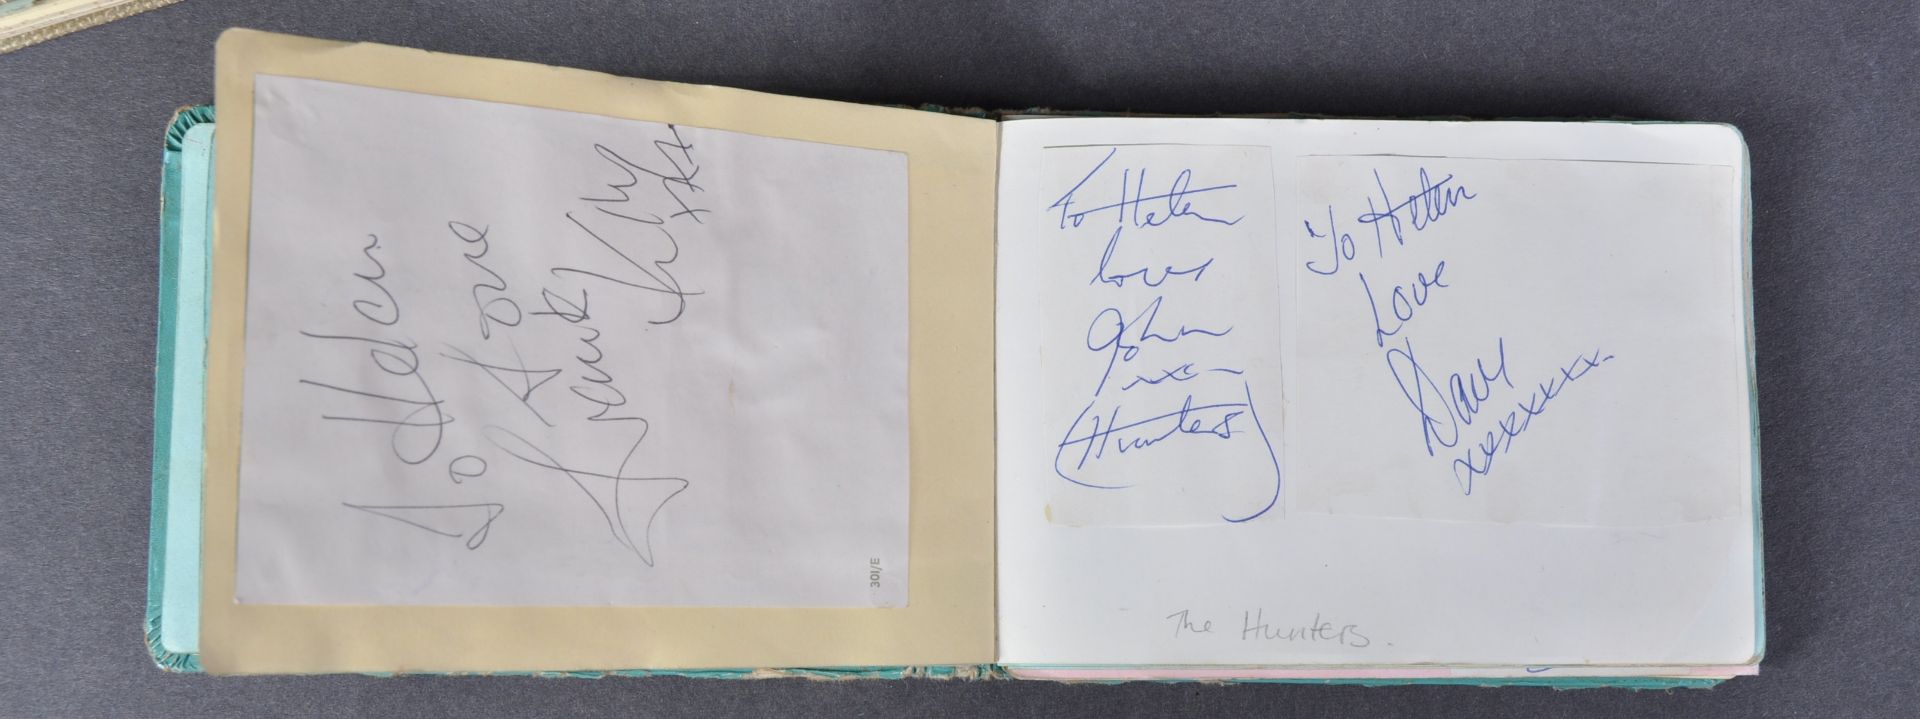 1960S MUSIC AUTOGRAPH ALBUMS - OBTAINED FROM DISCS-A-GOGO - Image 16 of 31